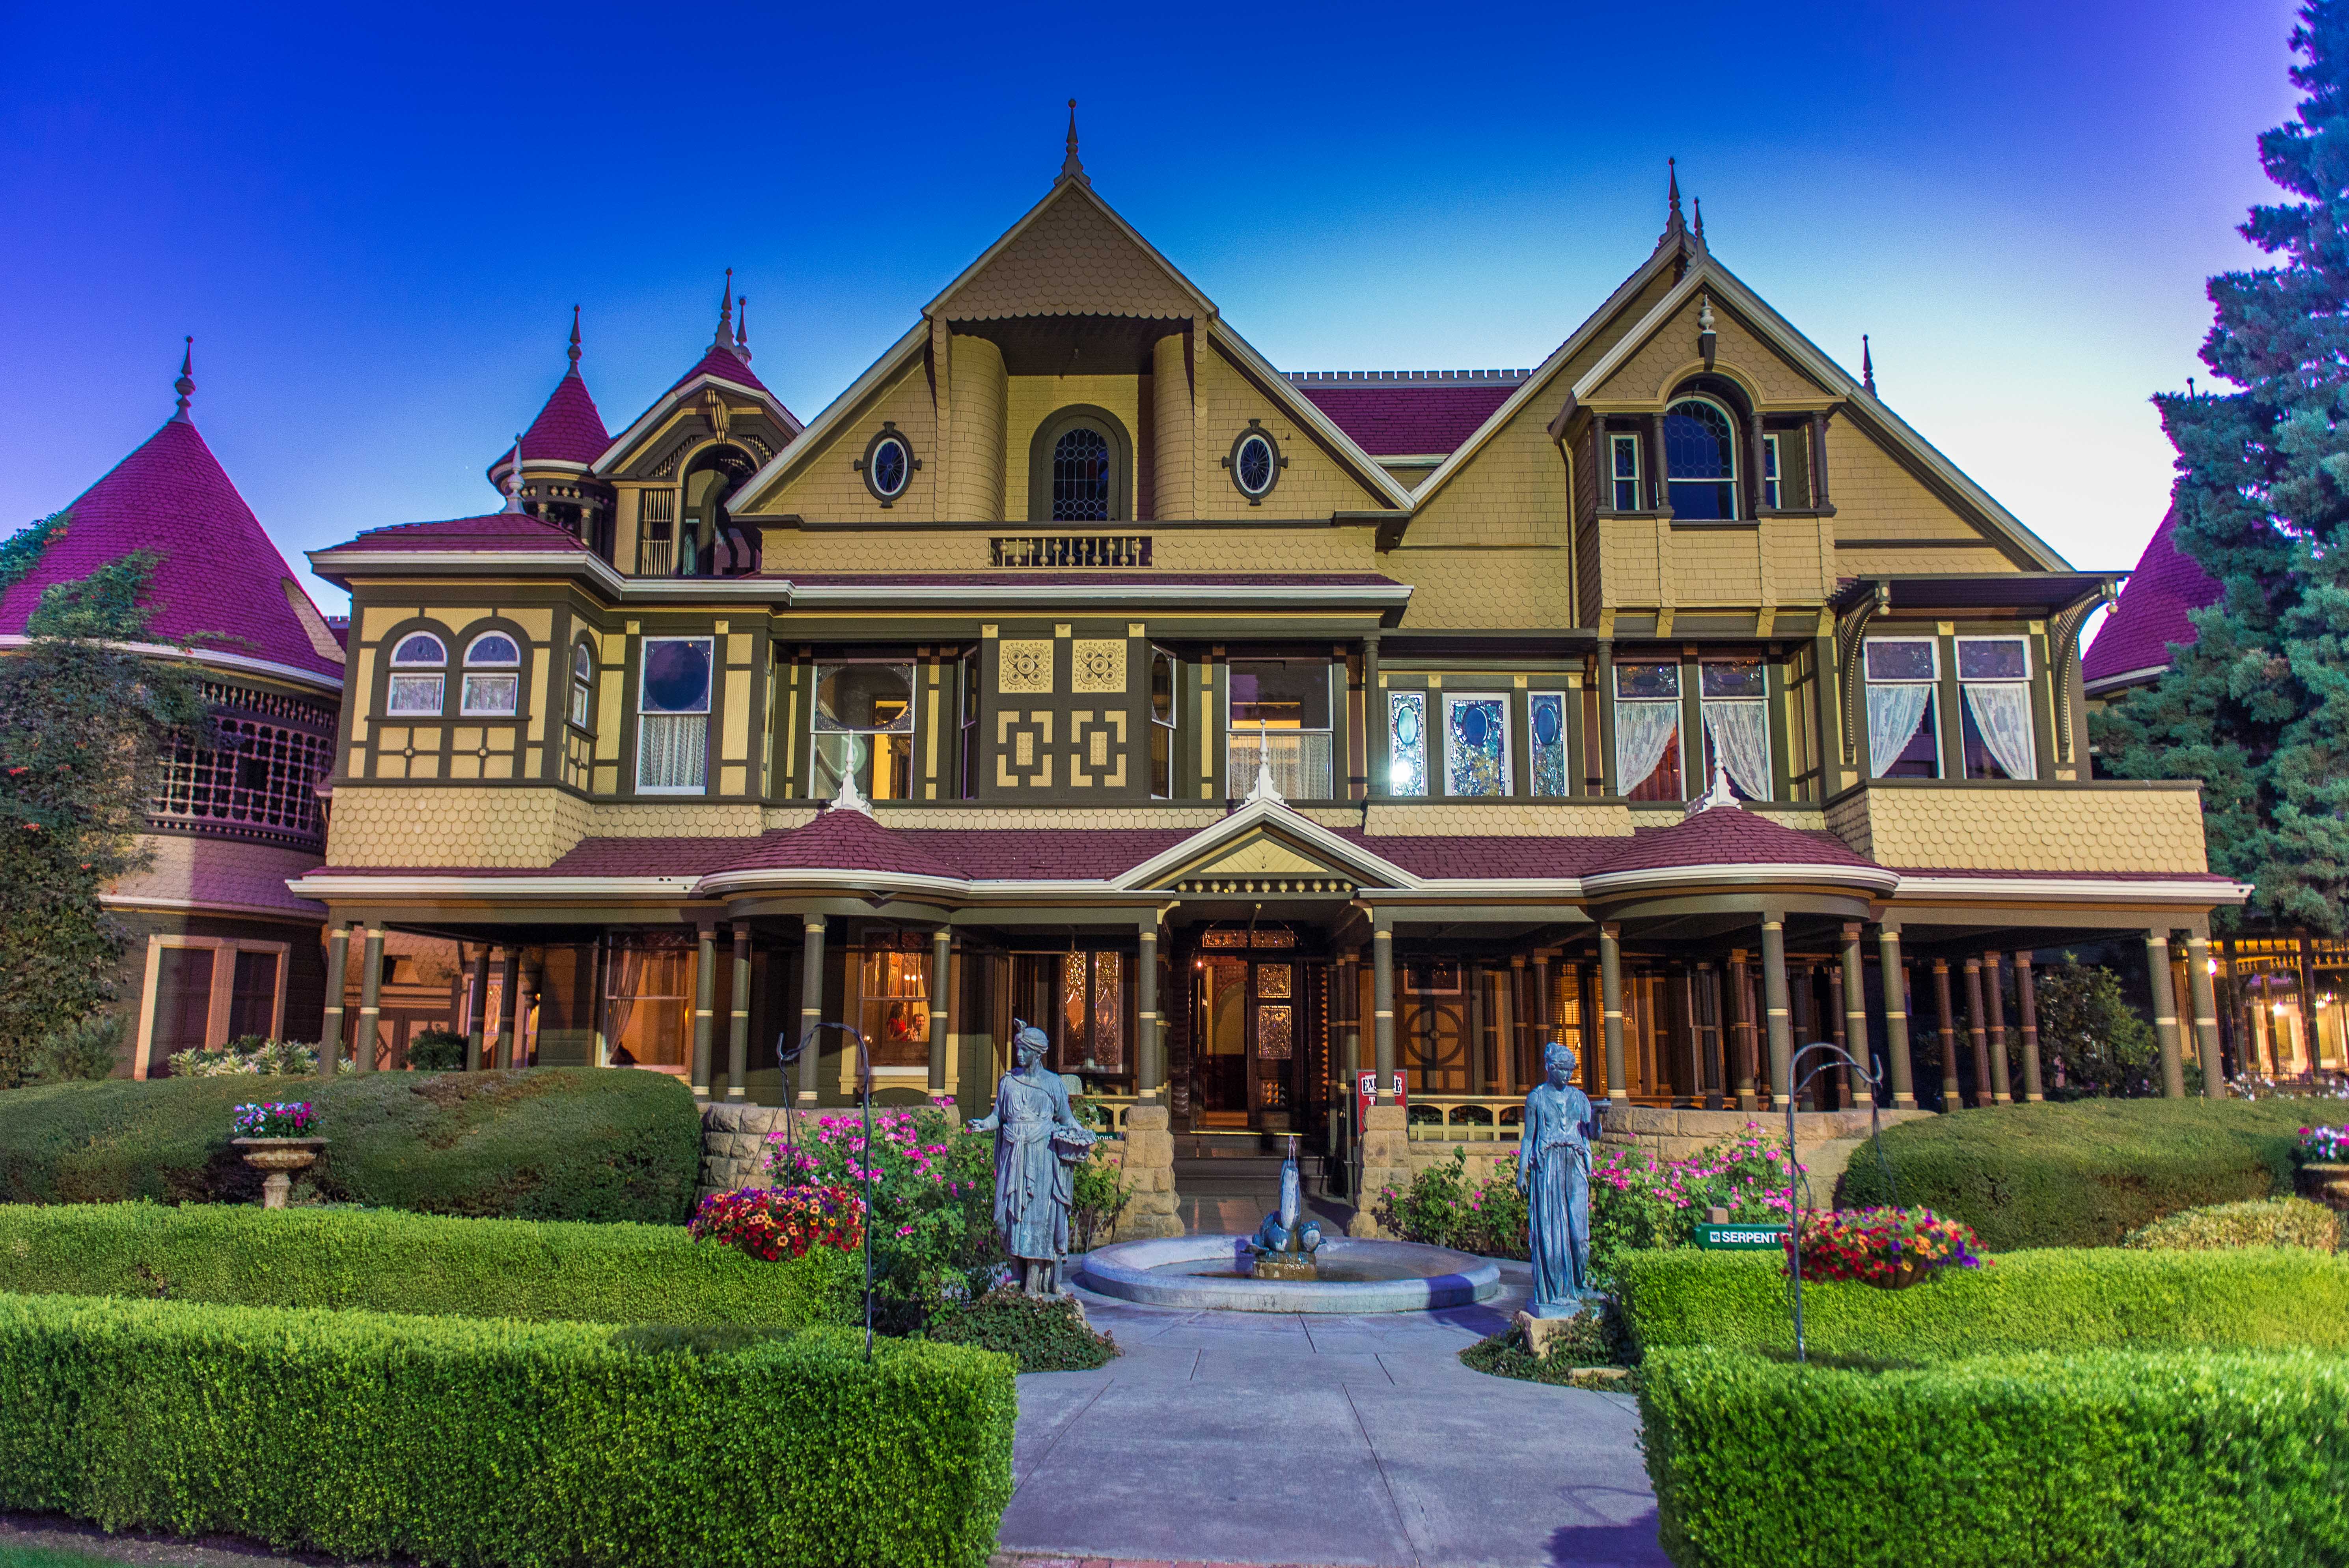 The Winchester Mystery House, in San Jose, California, garnered urban legends as widow heiress Sarah Winchester oversaw decades of unusual construction